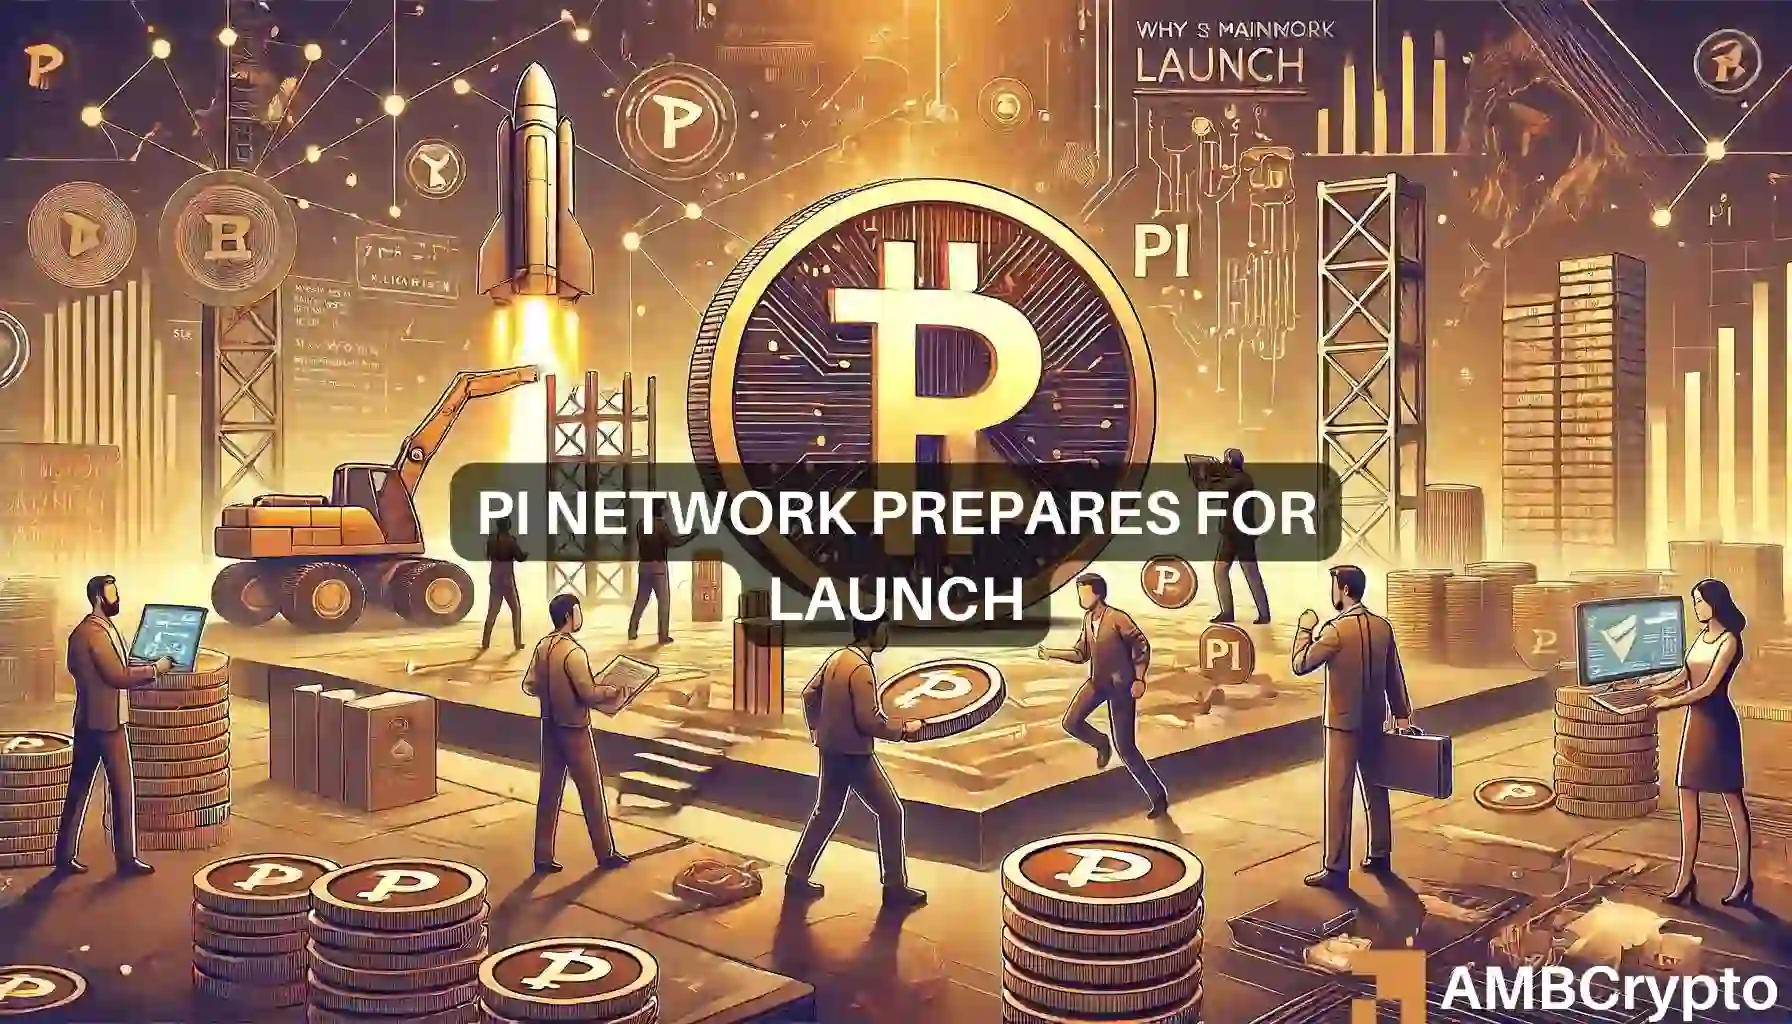 Why Pi Network’s mainnet launch is crucial for Pi’s price